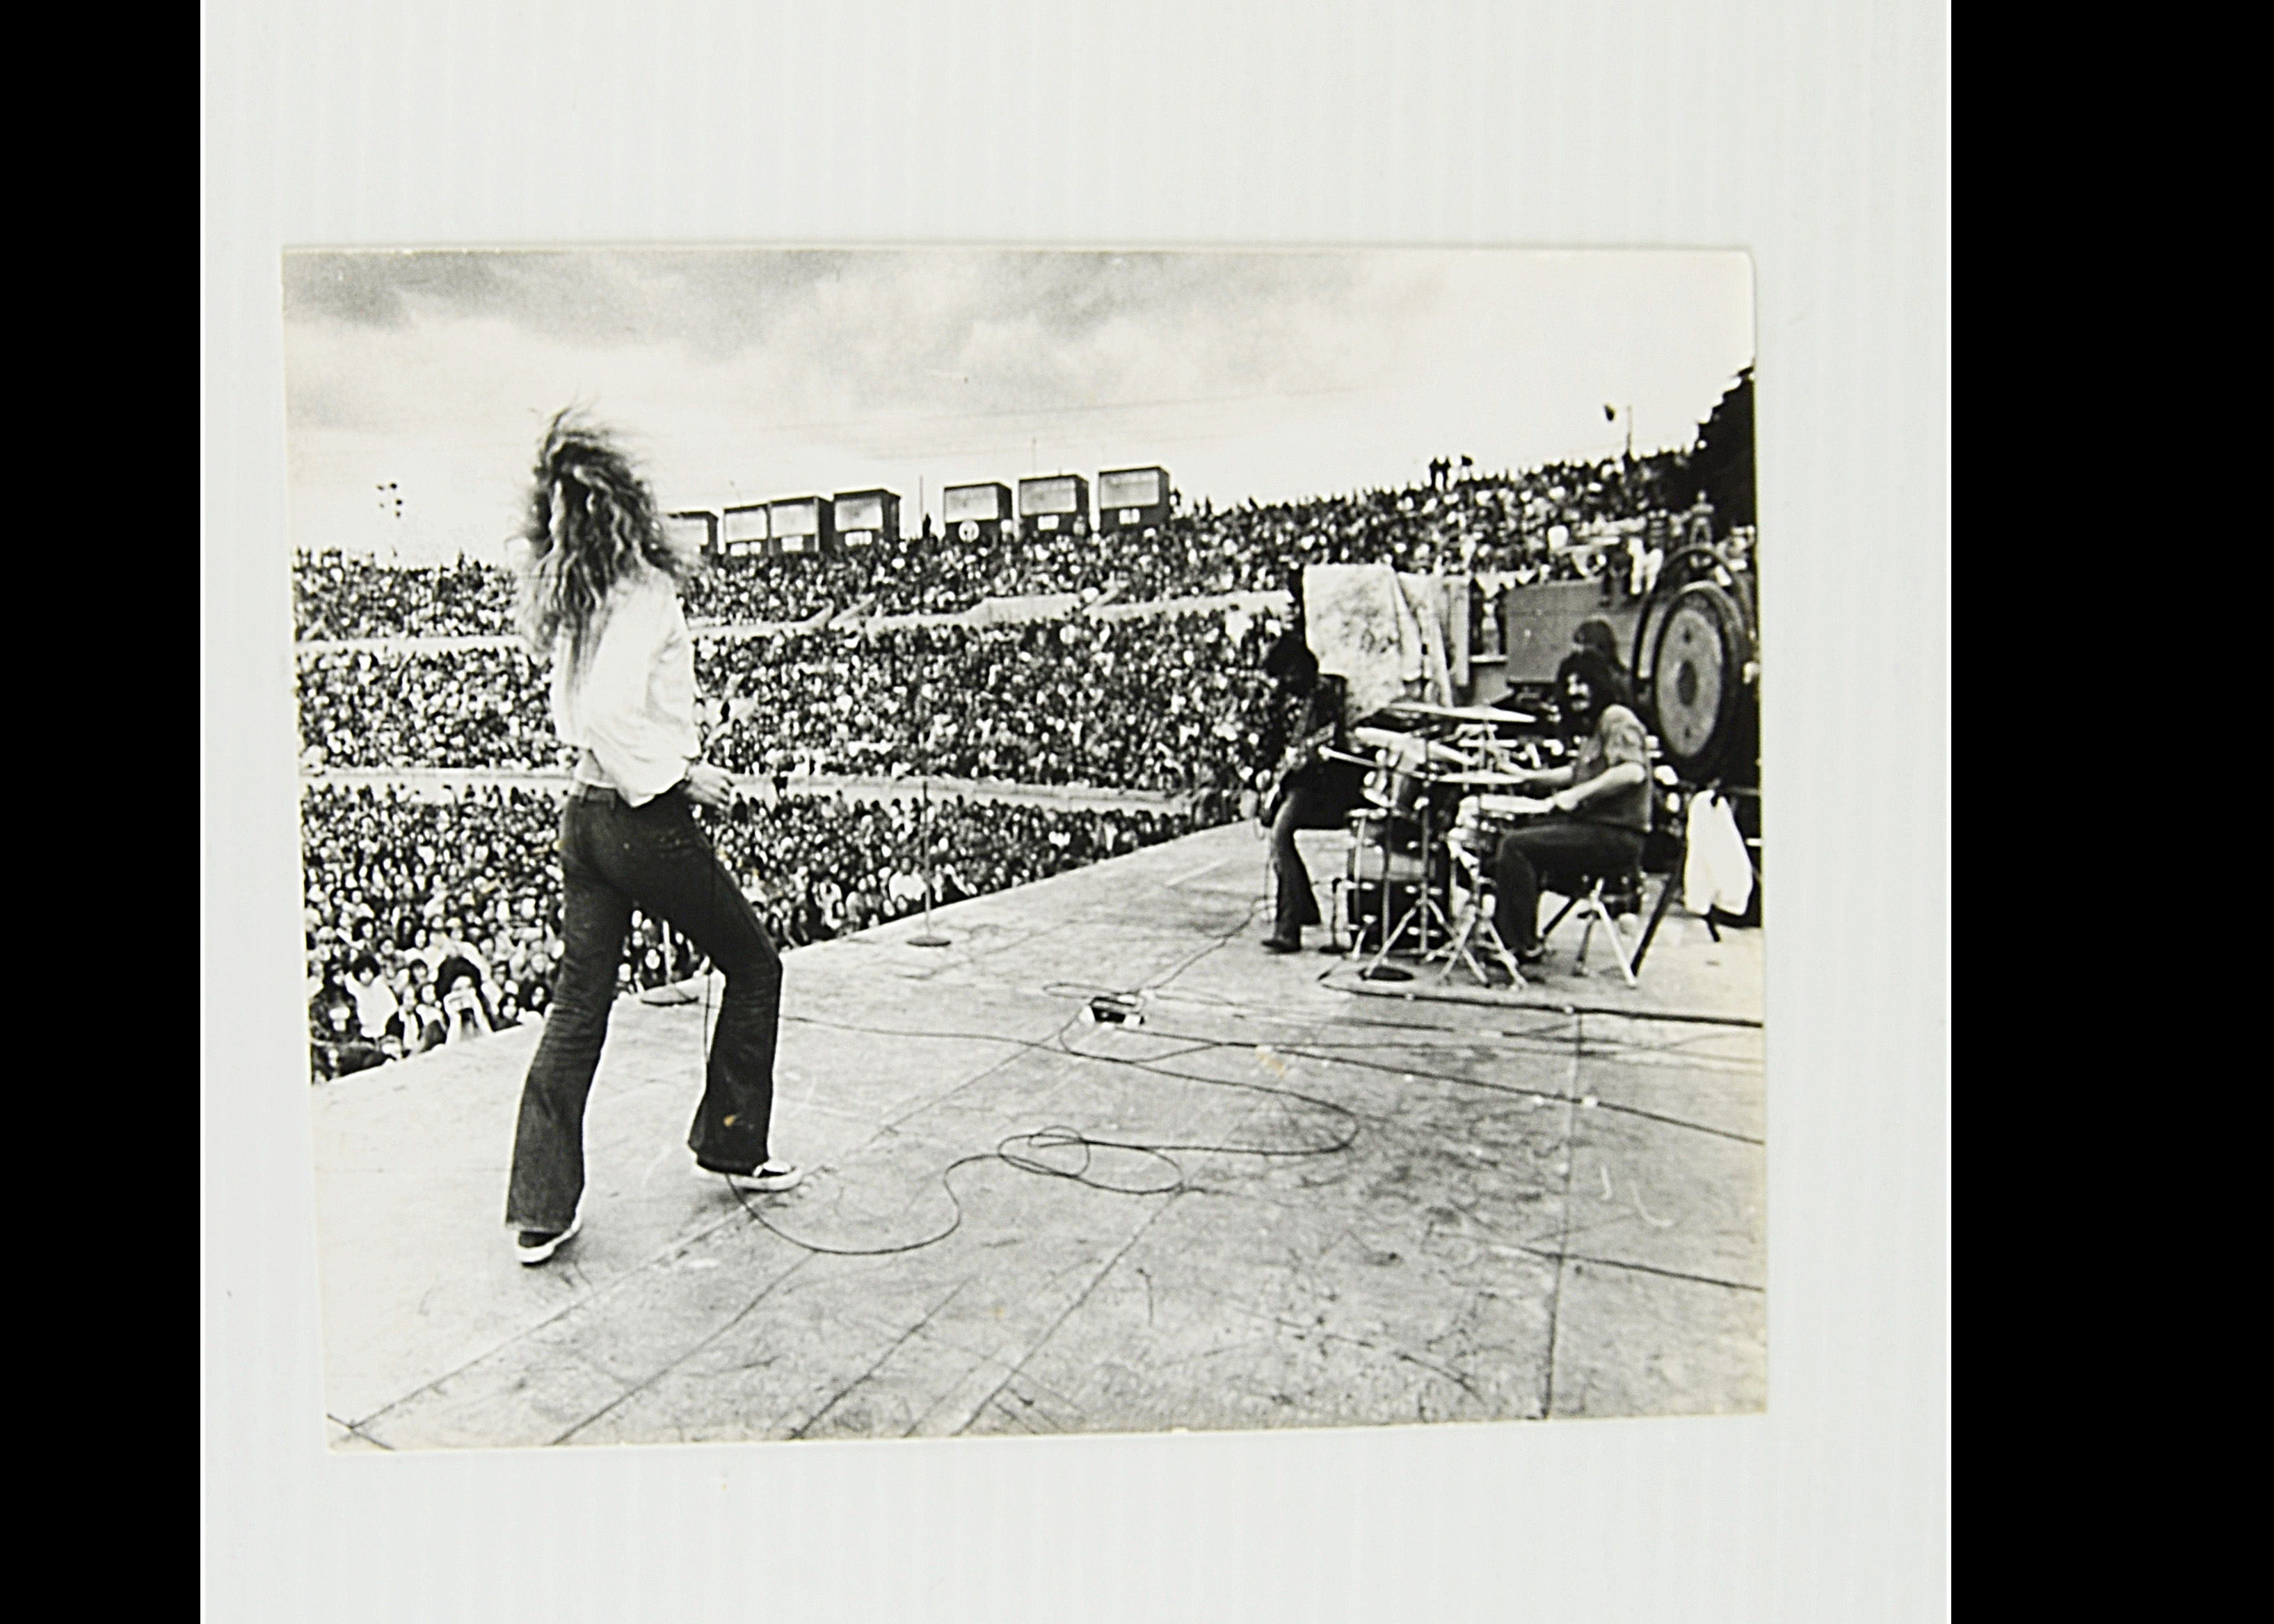 Led Zeppelin, five photographs believed to be contemporary silver gelatine prints from the period